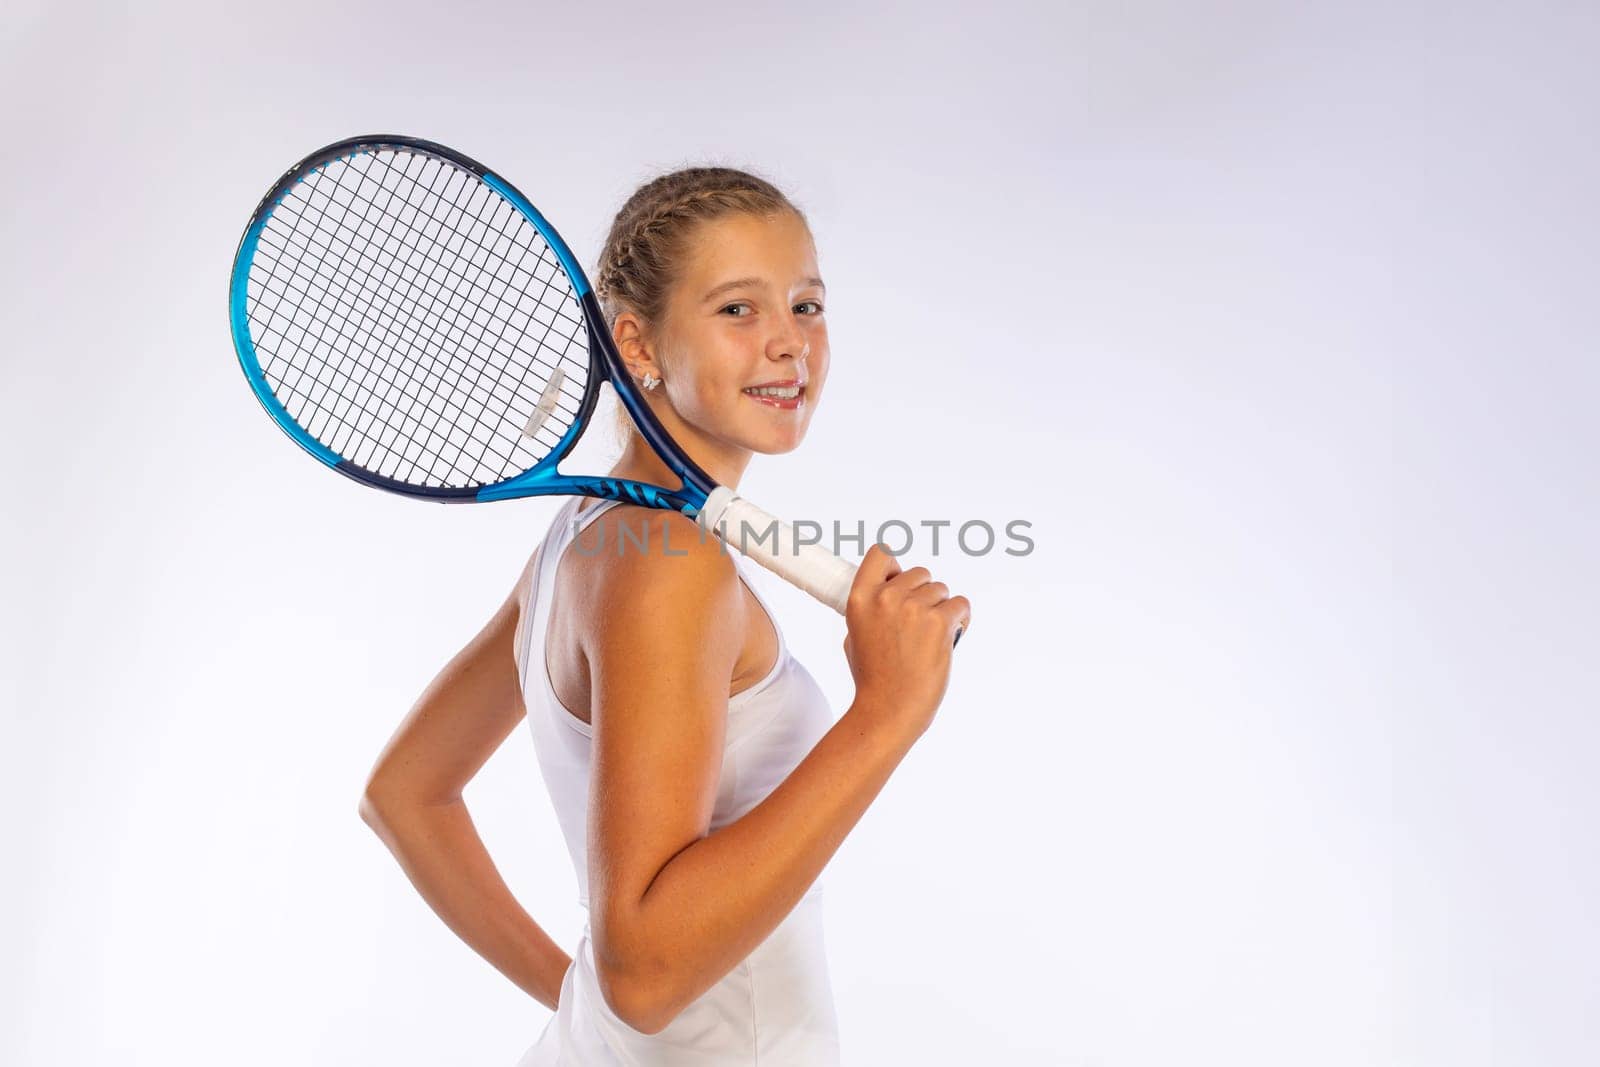 Tennis player. Download a photo to advertise your sports tennis academy for kids. Girl athlete teenager with racket isolated on white background. Sport concept